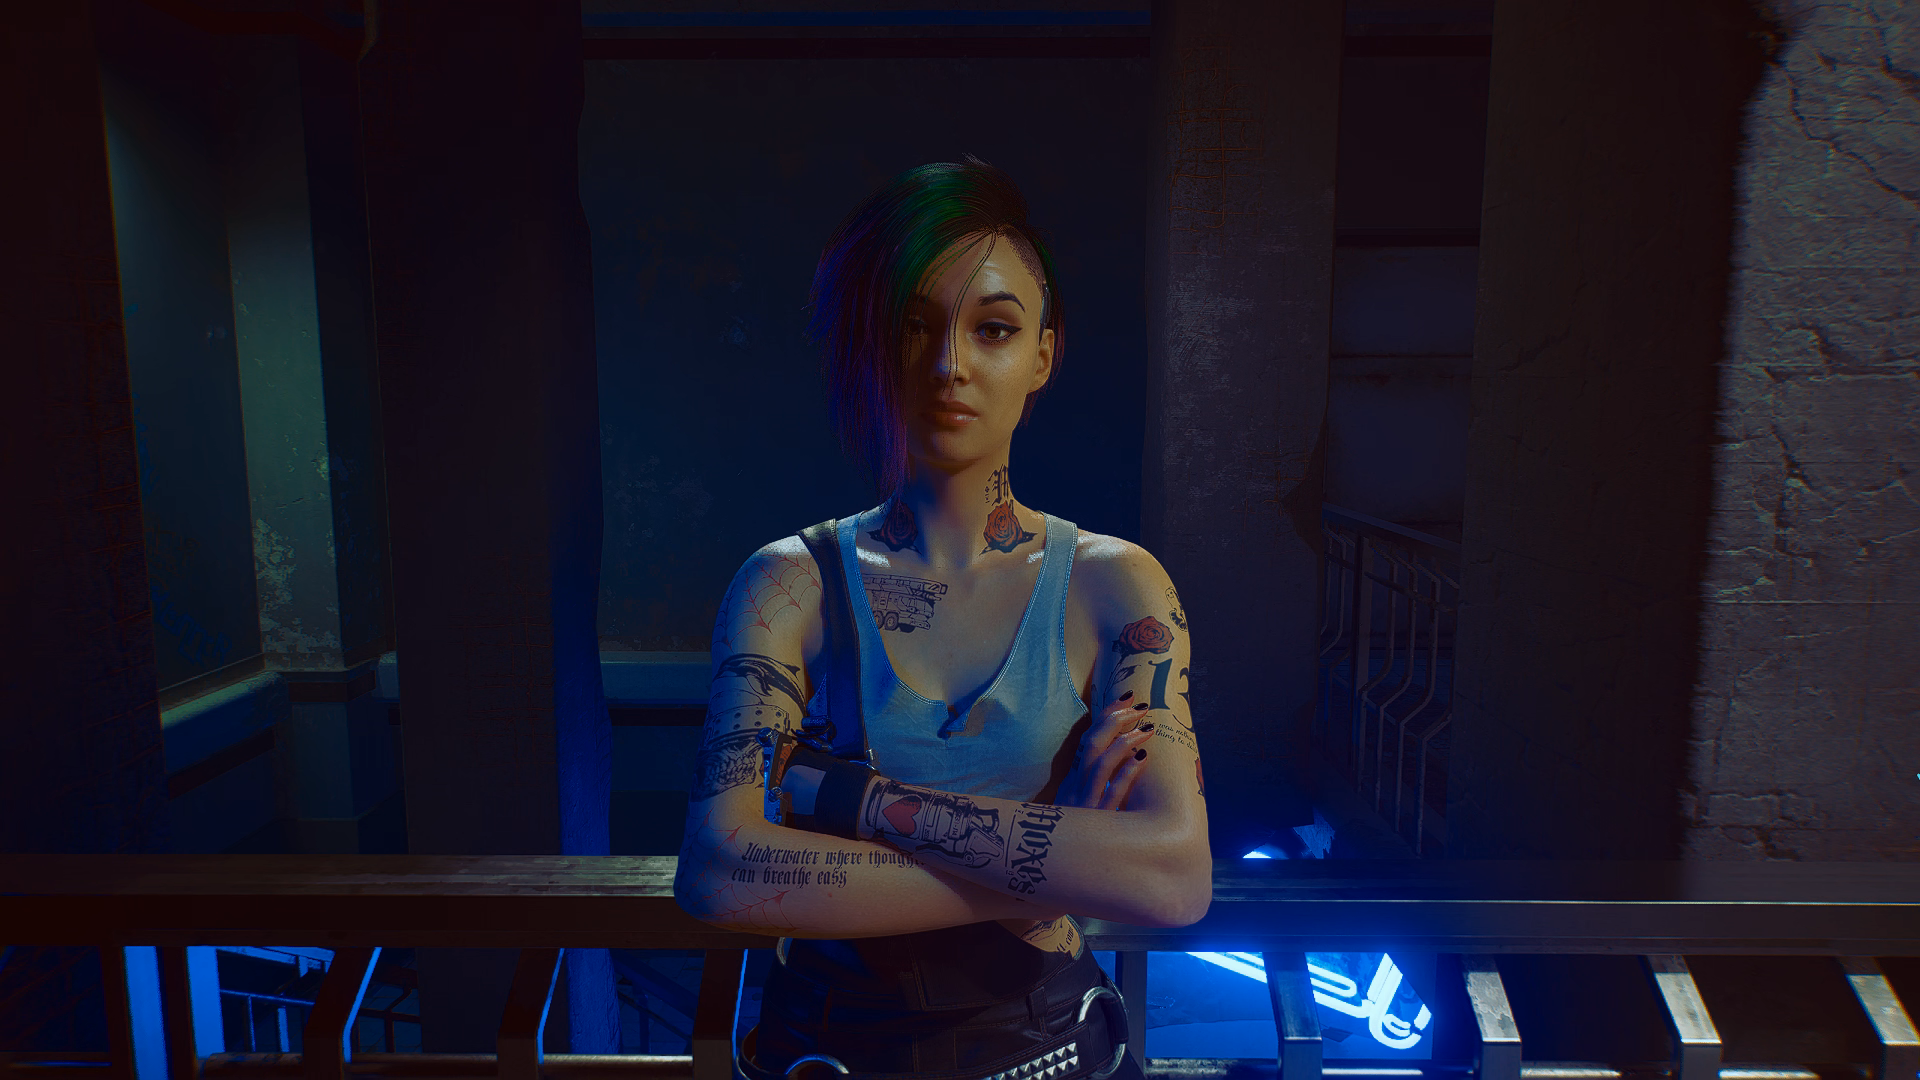 General 1920x1080 Cyberpunk 2077 ray tracing Judy Alvarez blue light building screen shot tattoo white tank top black pants belt multi-colored hair video game characters CGI video games digital art looking at viewer arms crossed